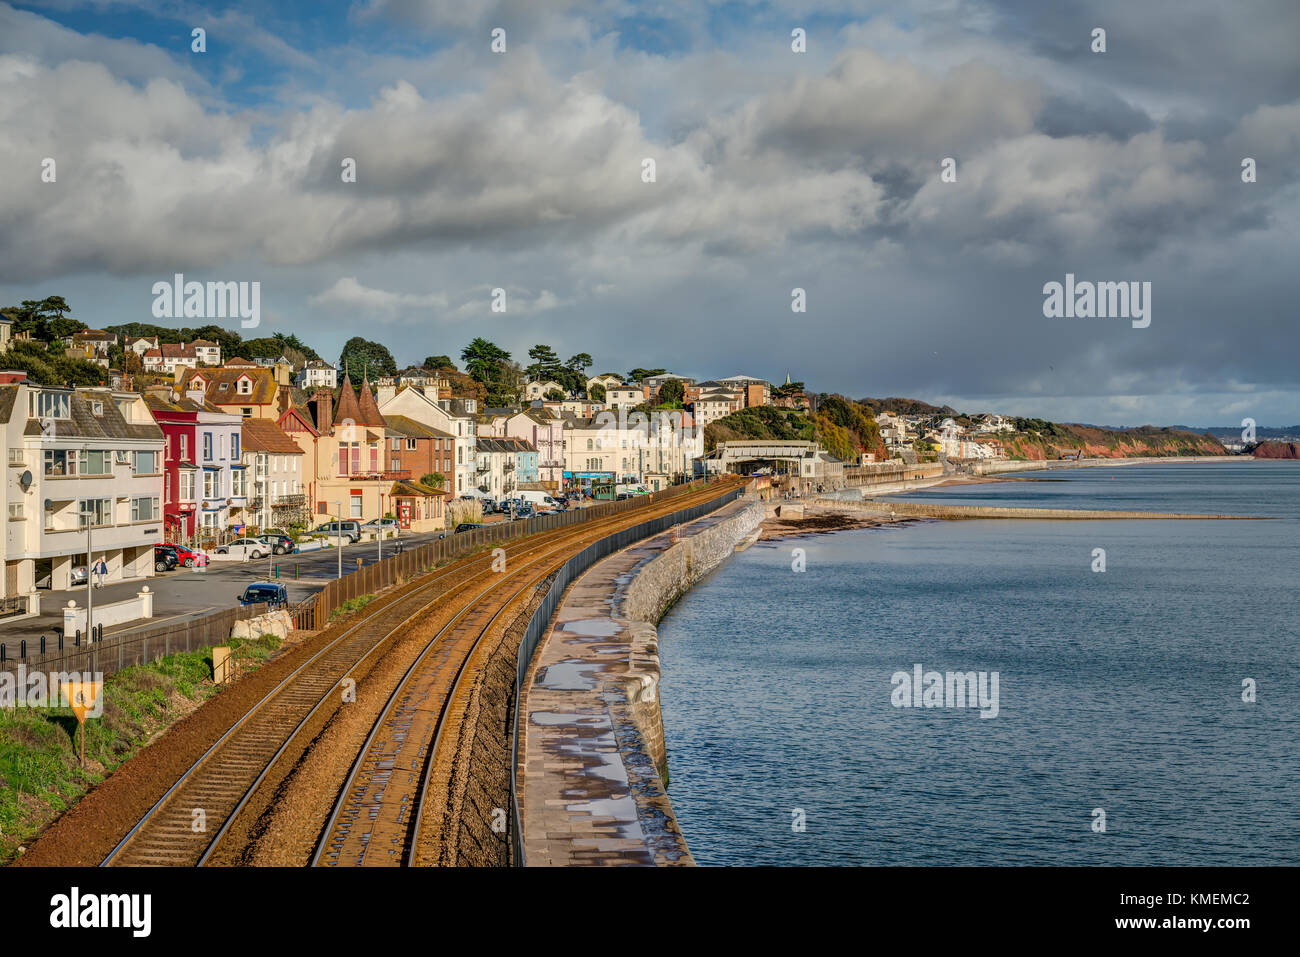 An English seaside landscape of Dawlish town, Devon, separated from the blue sea by the rusted railway lines which lead through. A blustery sunny day. Stock Photo